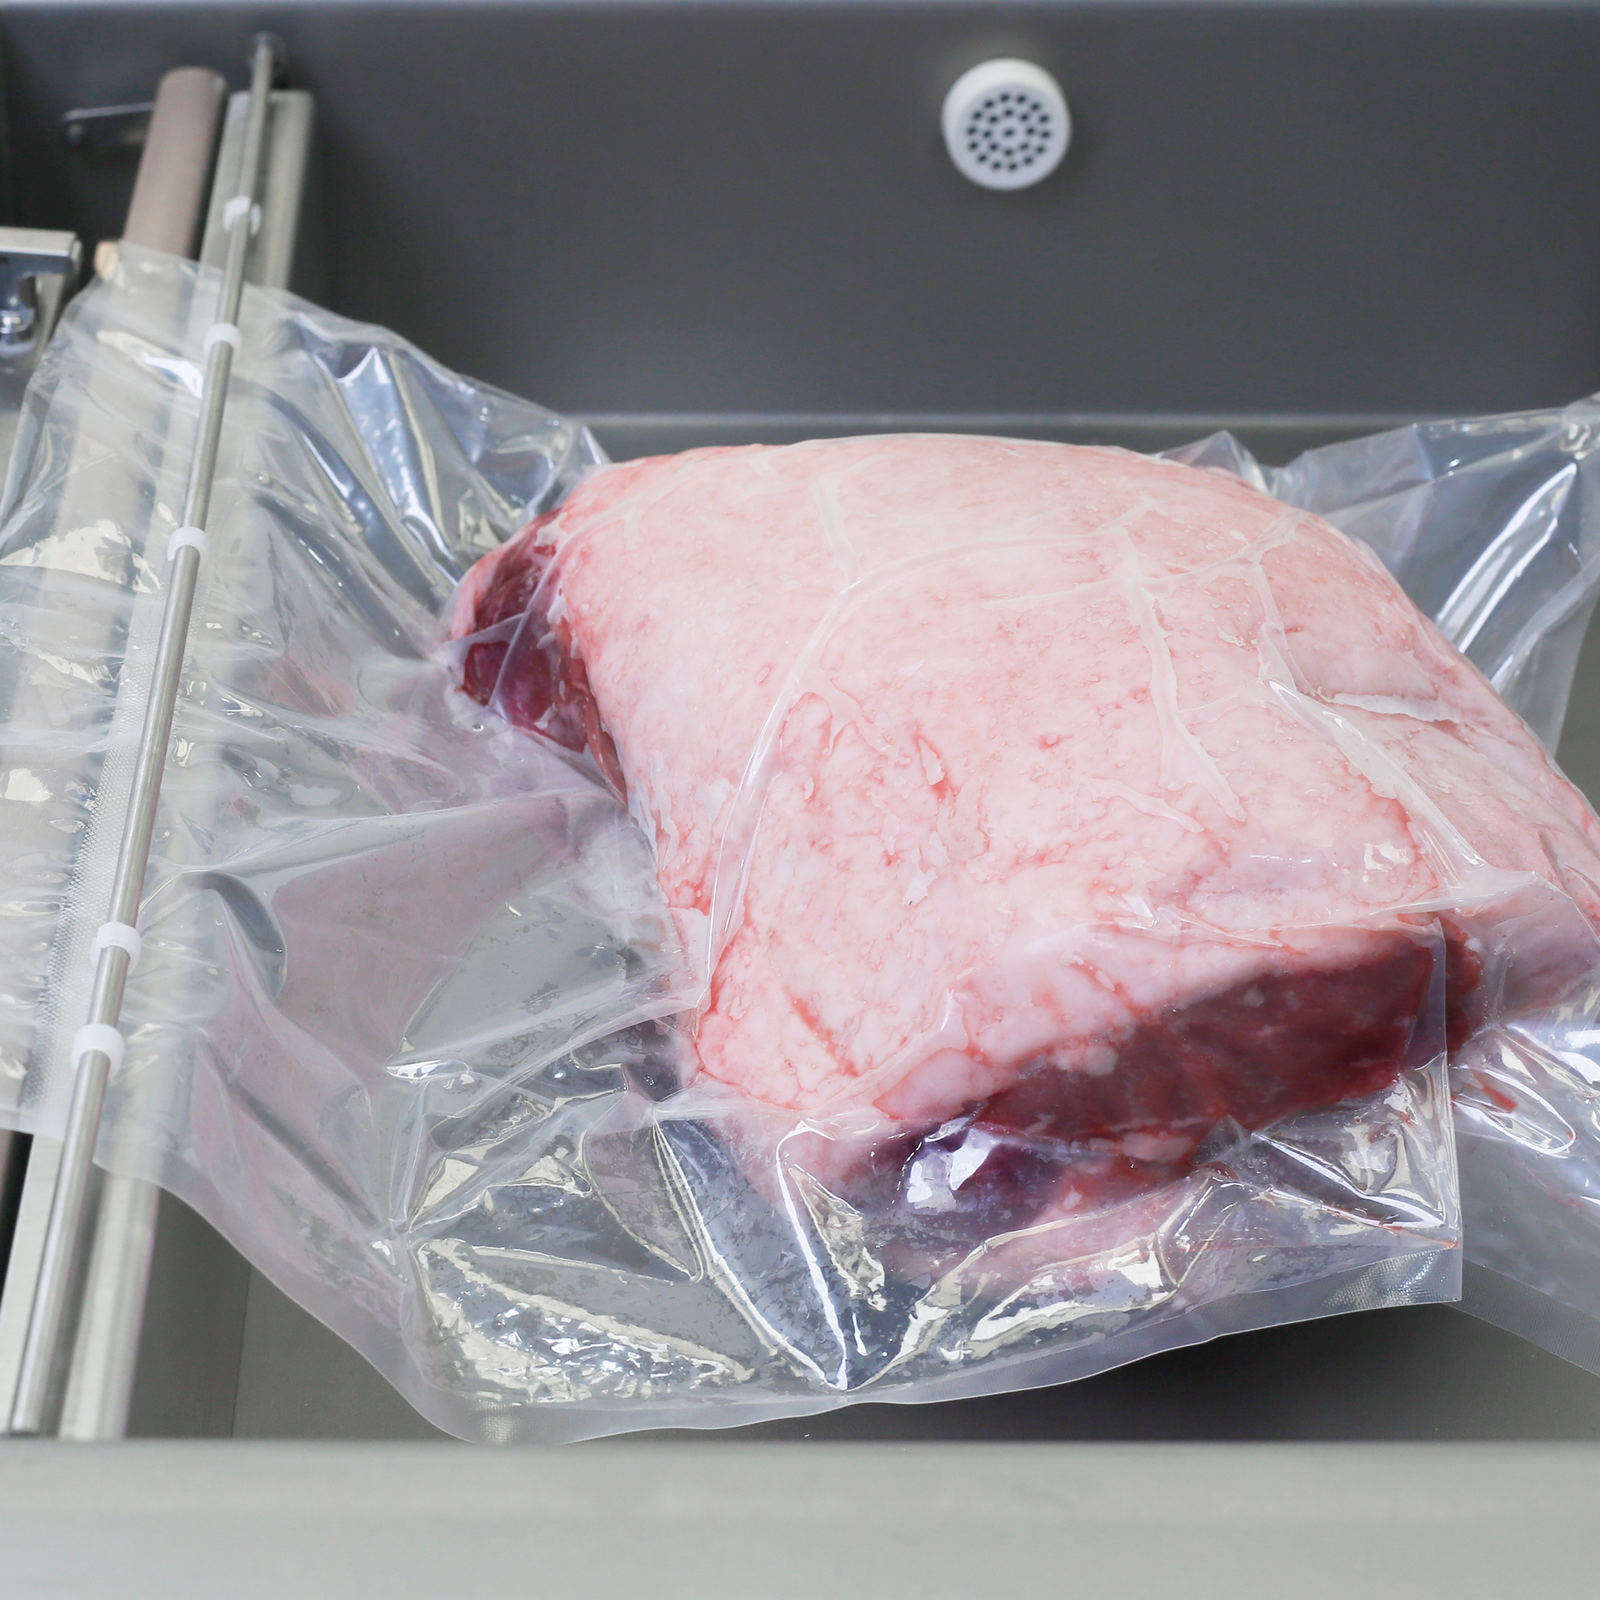 Vacuumed sealed bag with a large piece of meet inside. The bag is positioned inside chamber of the stainless steel JORESTECH tabletop commercial single chamber vacuum sealer with dual seal bar